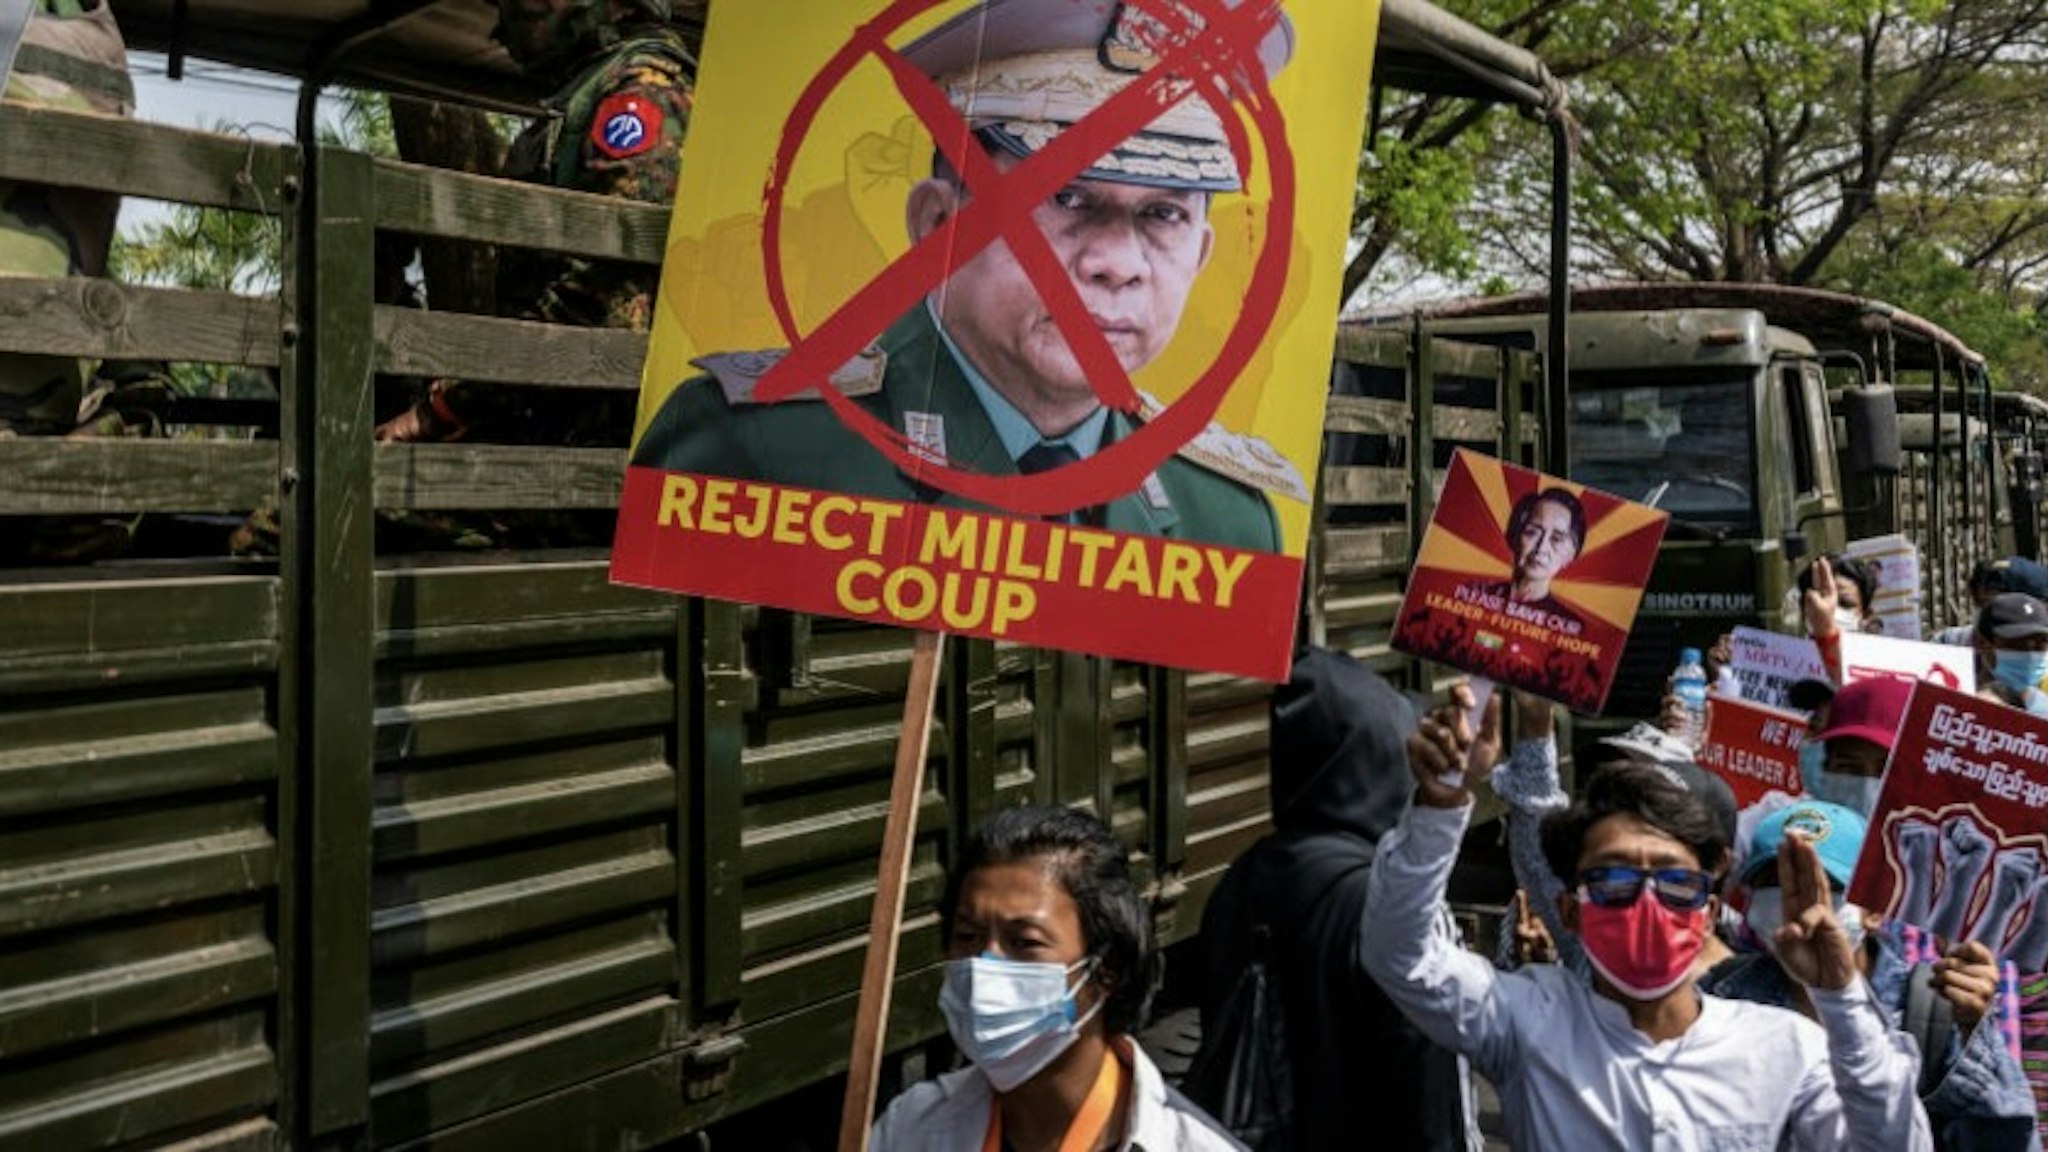 YANGON, MYANMAR - FEBRUARY 15: Protesters hold banners and shout slogans while marching past Myanmar military soldiers who arrived to guard the Central Bank overnight on February 15, 2021 in Yangon, Myanmar. The U.S. Embassy in Myanmar told Americans in Myanmar to "shelter in place" in an announcement after military movements and reports of possible interruptions to telecoms overnight. Armored vehicles were seen on the streets of Myanmar's capital, but protesters turned out in force despite the military presence. (Photo by Hkun Lat/Getty Images)